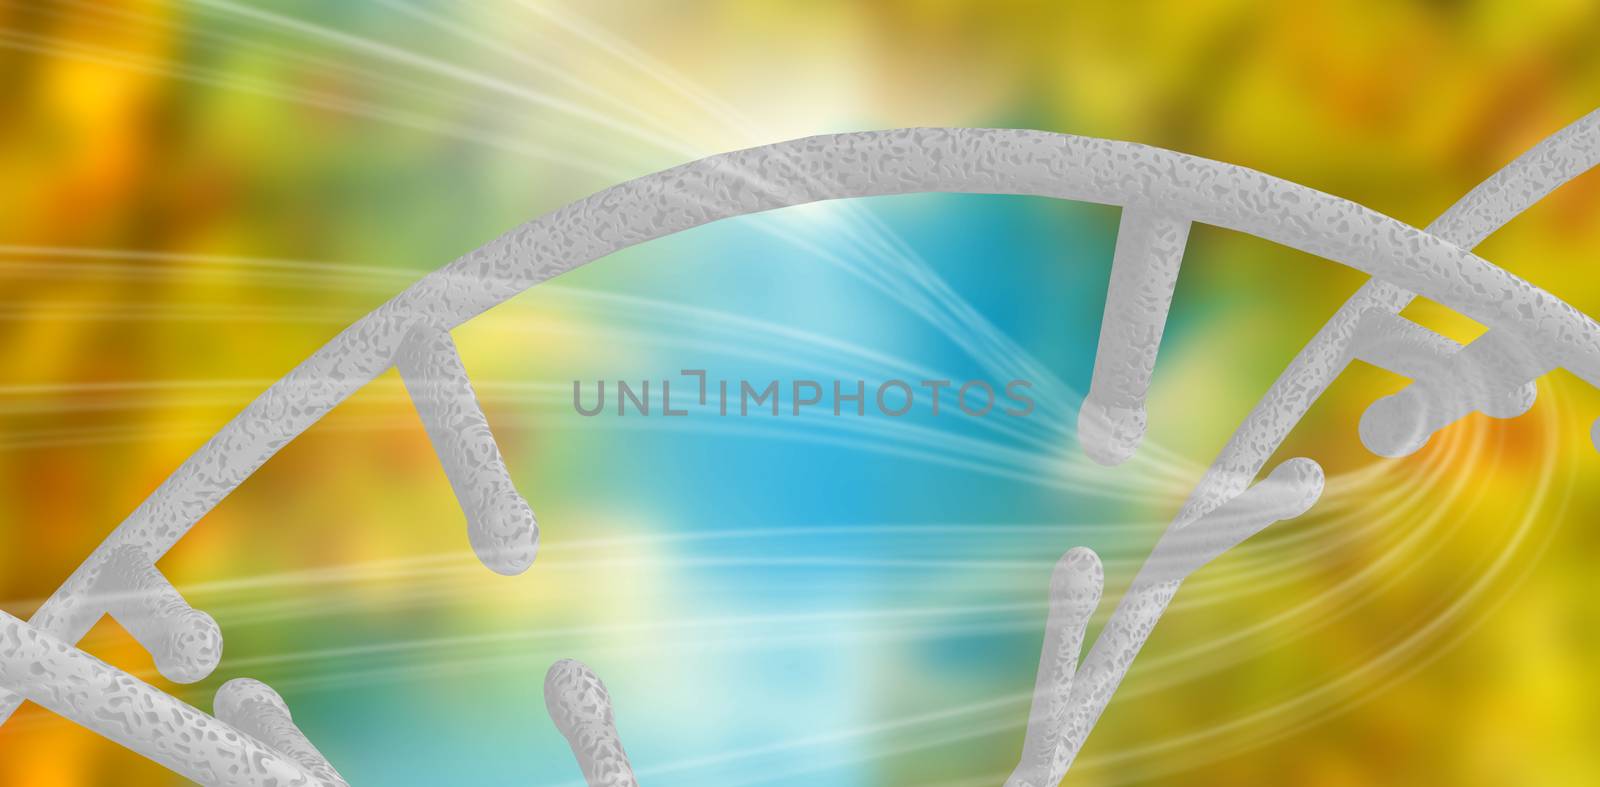 3d Image of dna helix against blue and orange background with shiny lines